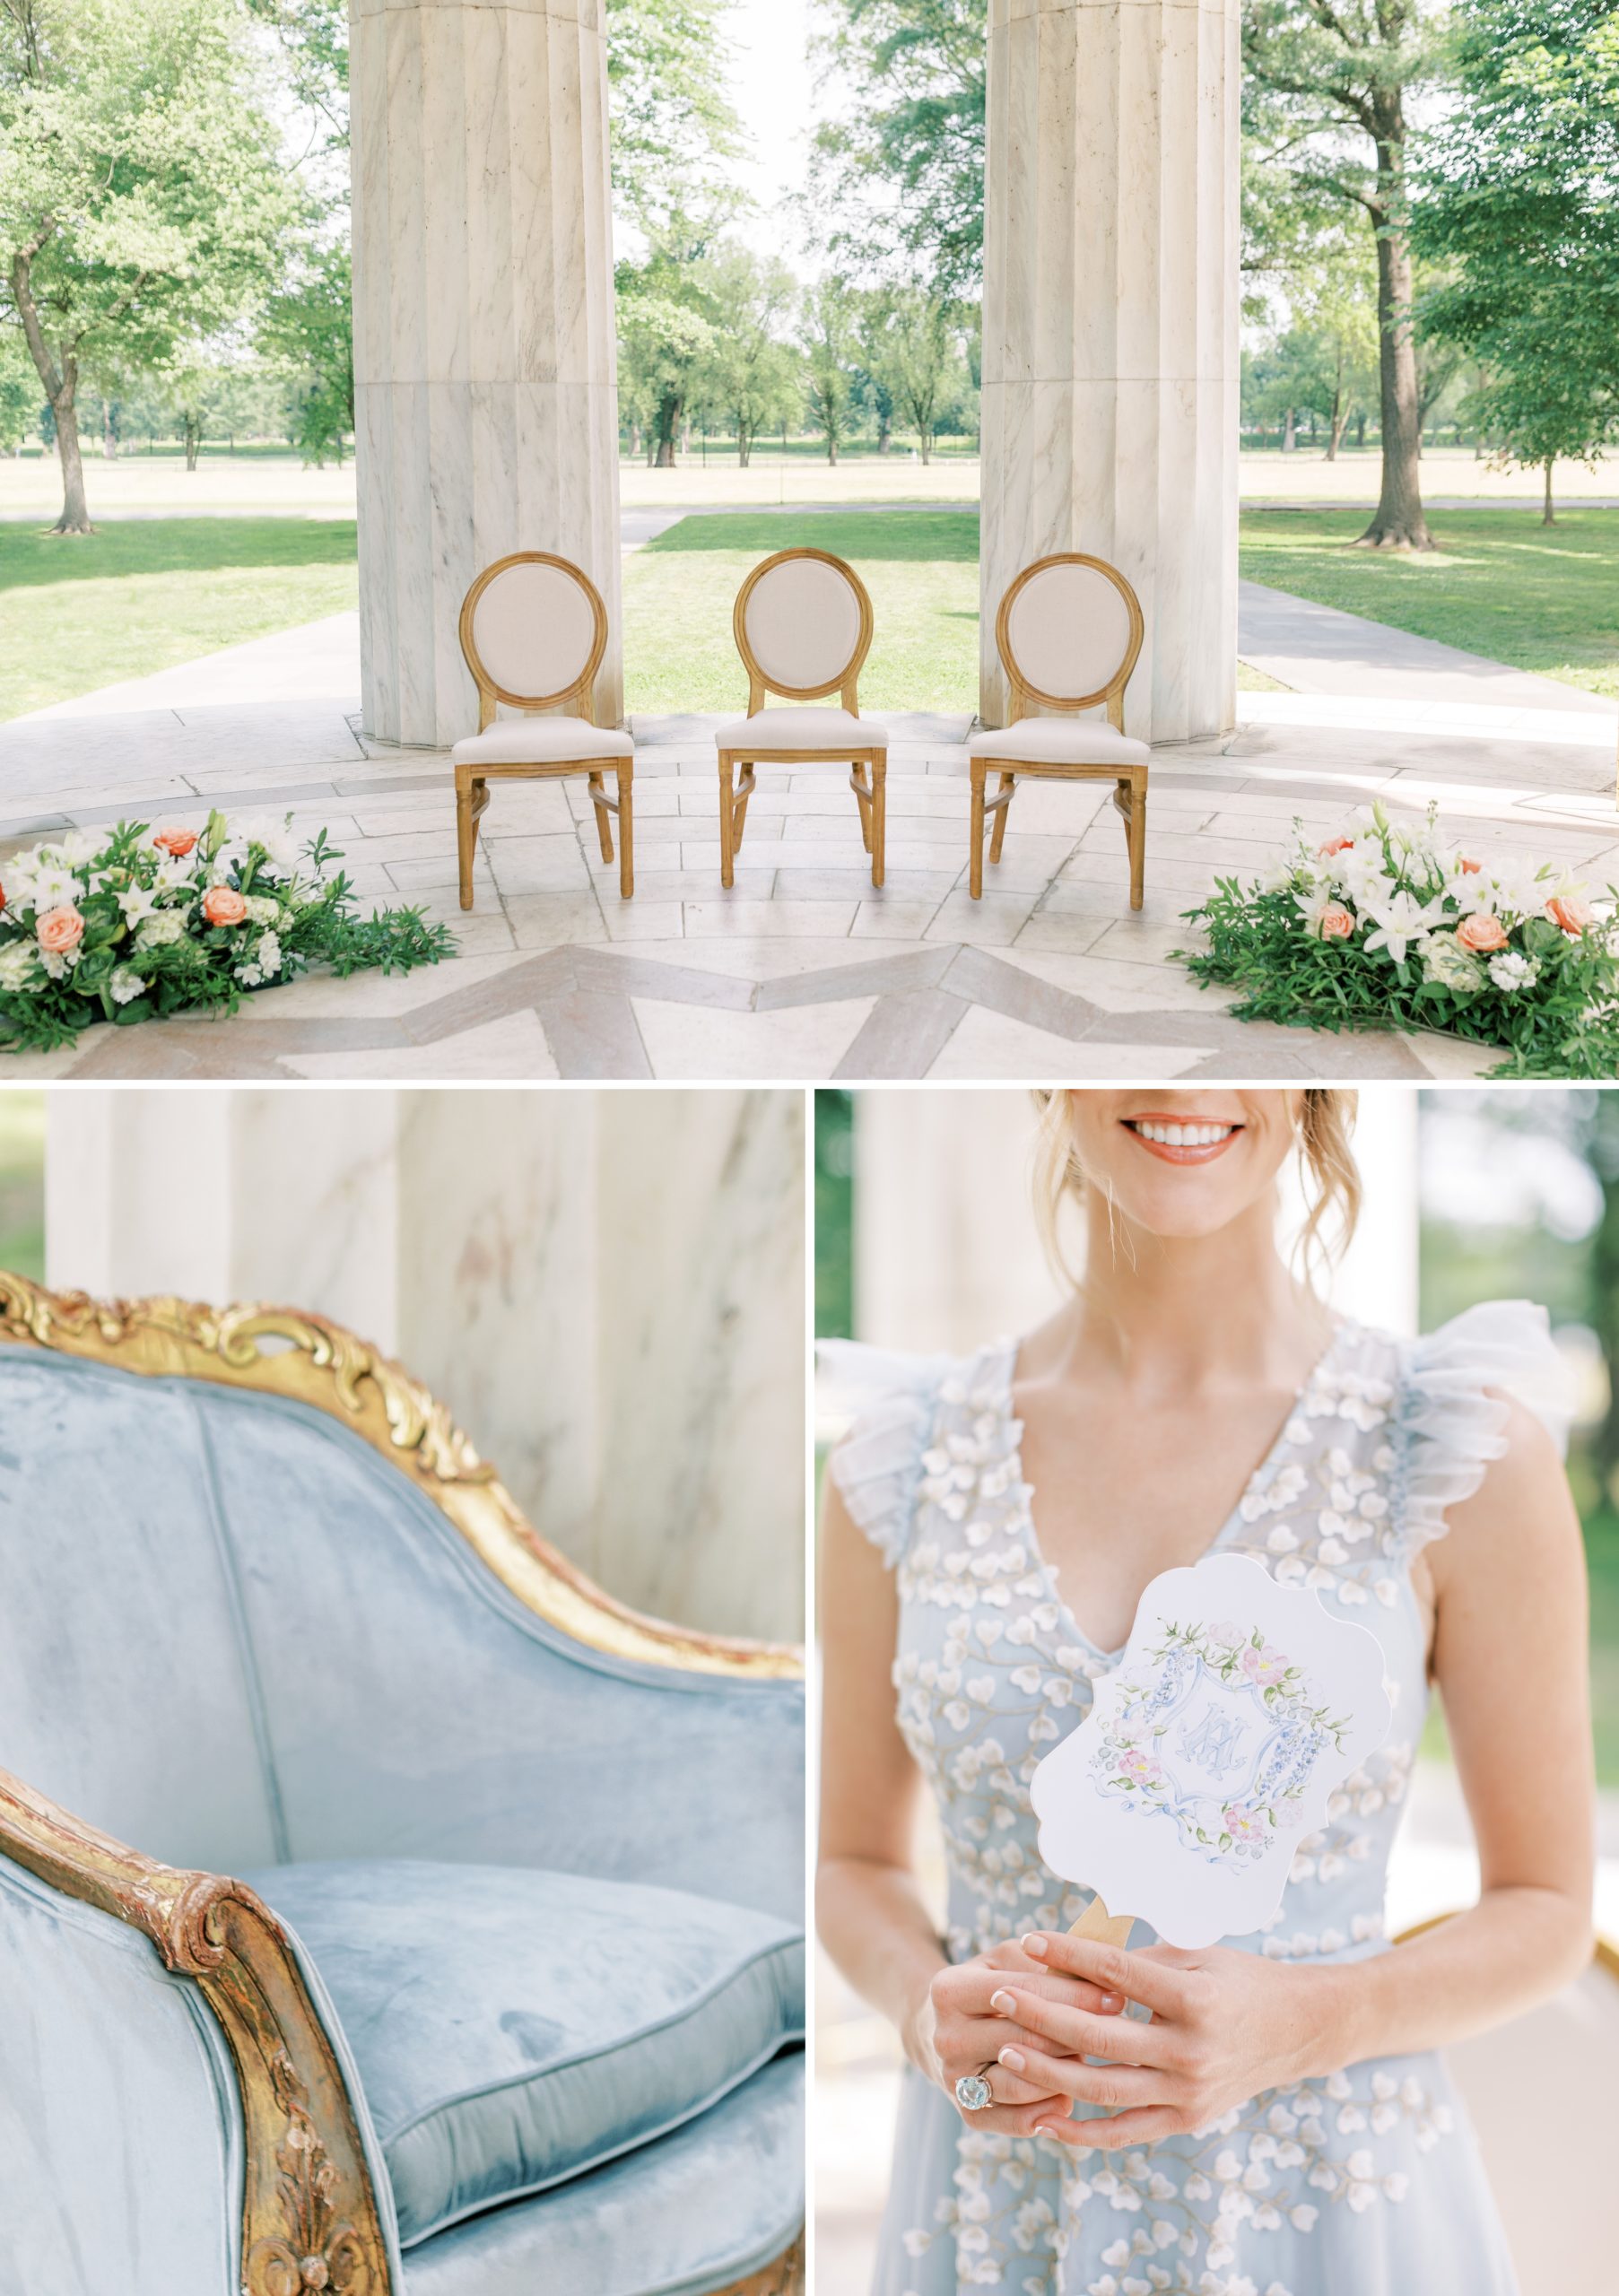 An intimate spring wedding elopement at the War Memorial in Washington, DC photographed by Alicia Lacey and planned by SRS Events.